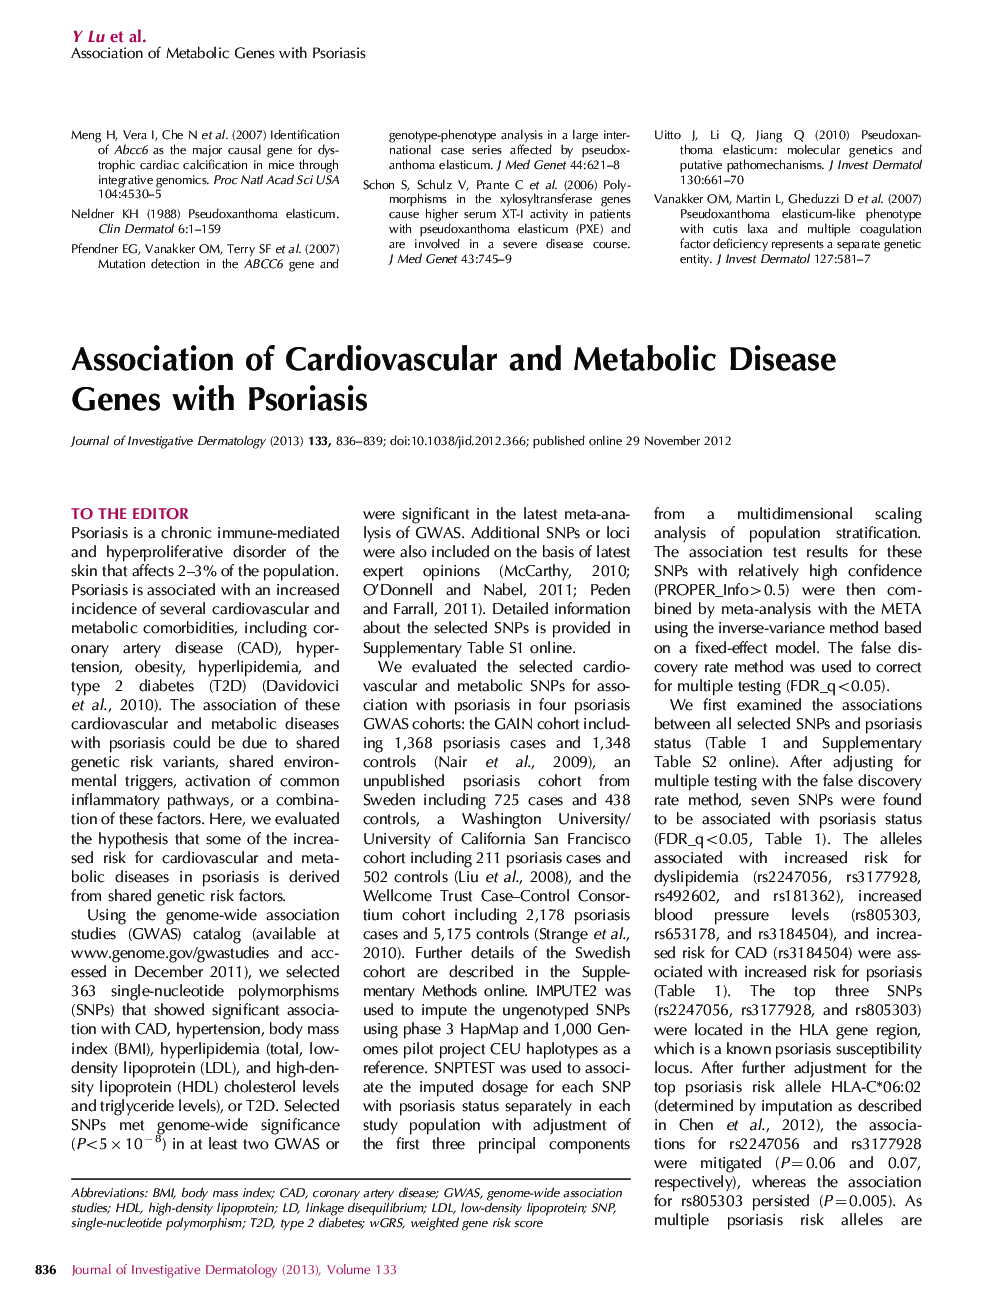 Association of Cardiovascular and Metabolic Disease Genes with Psoriasis